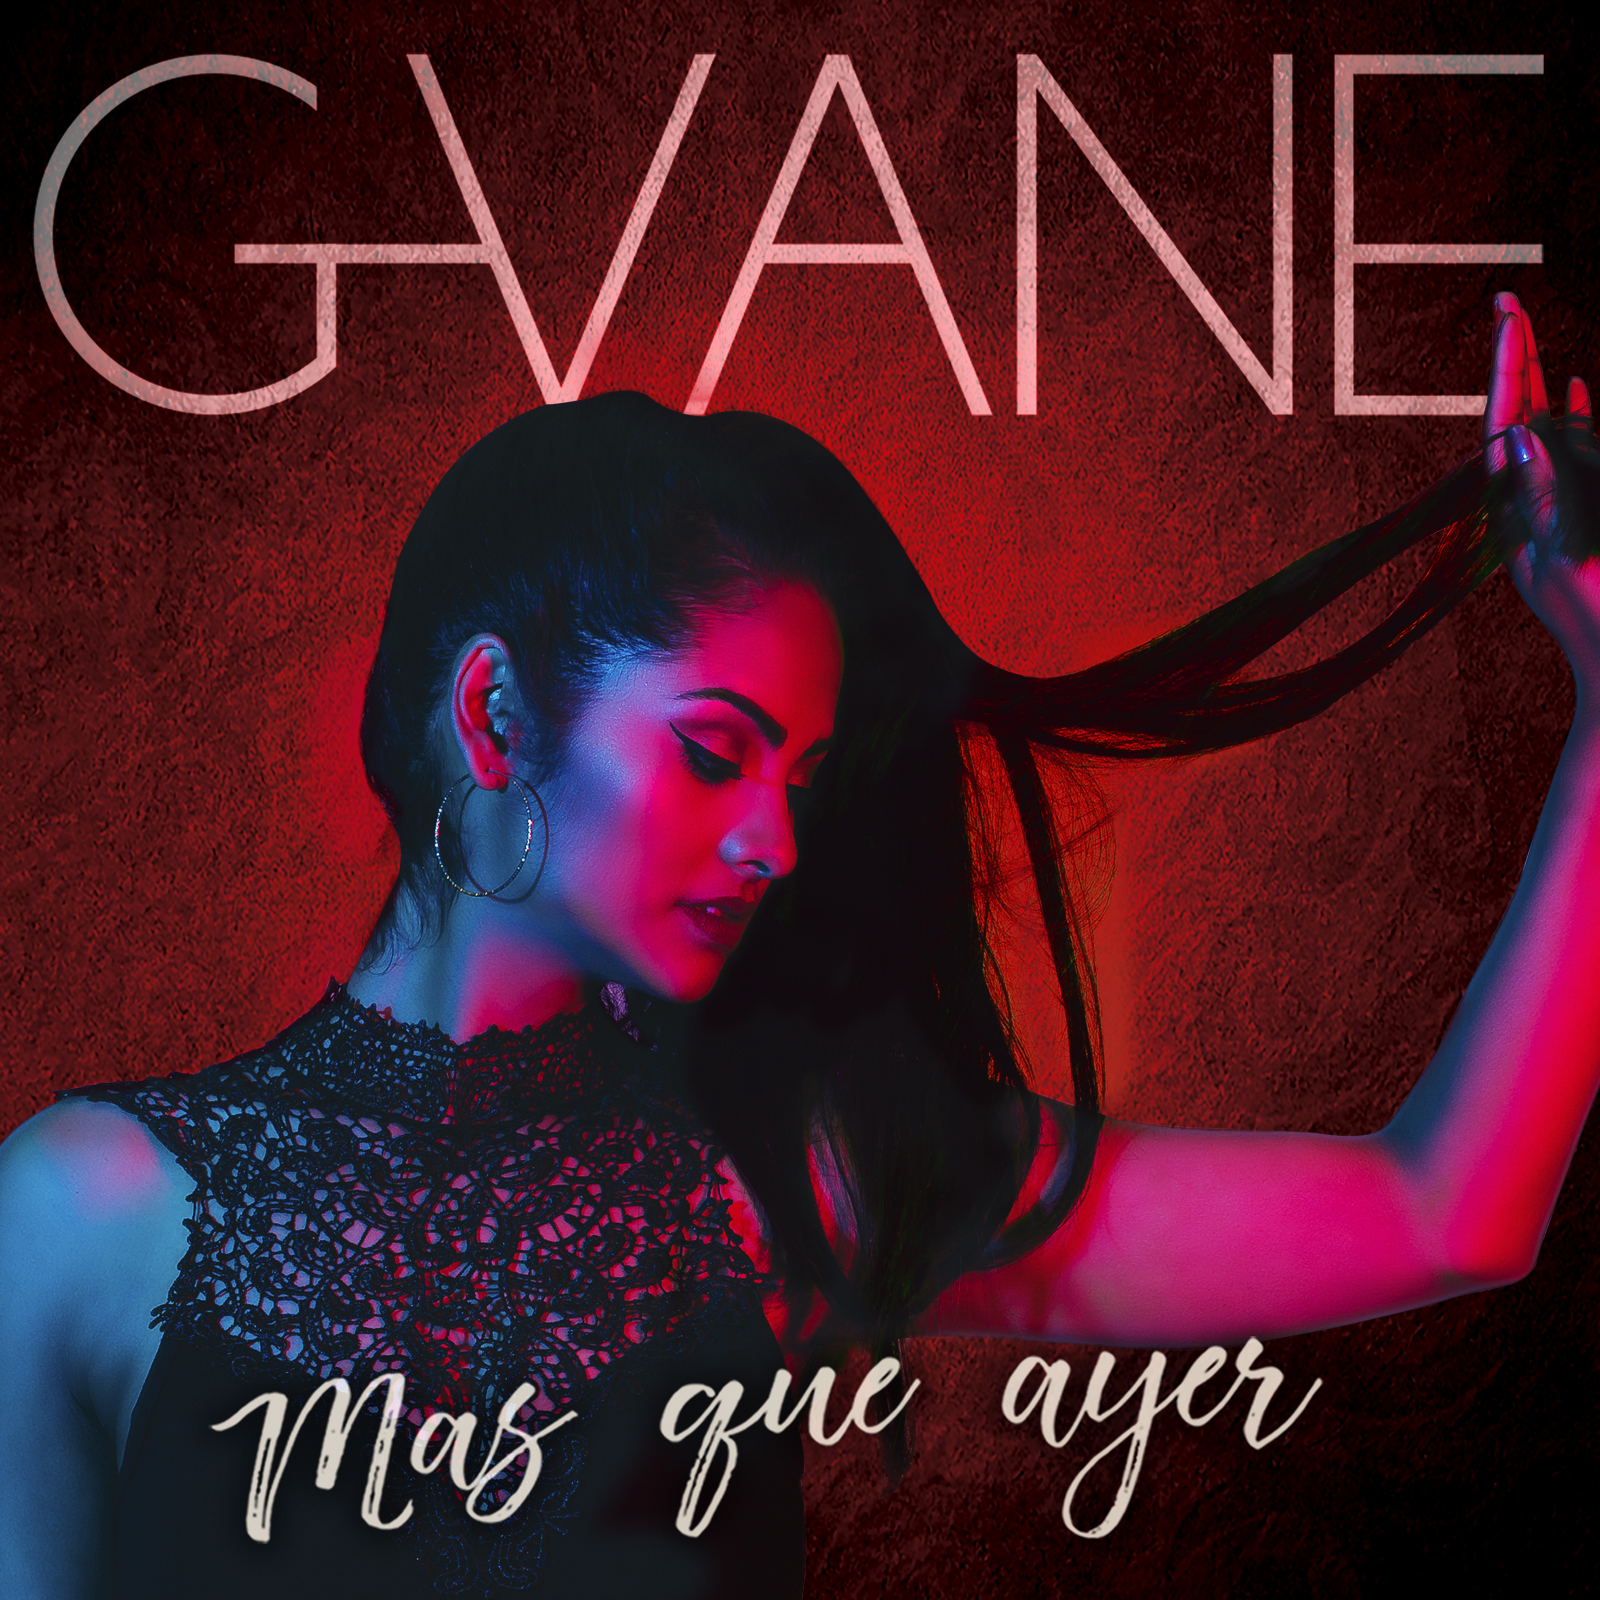 Cover photo for single release 'Mas Que Ayer'